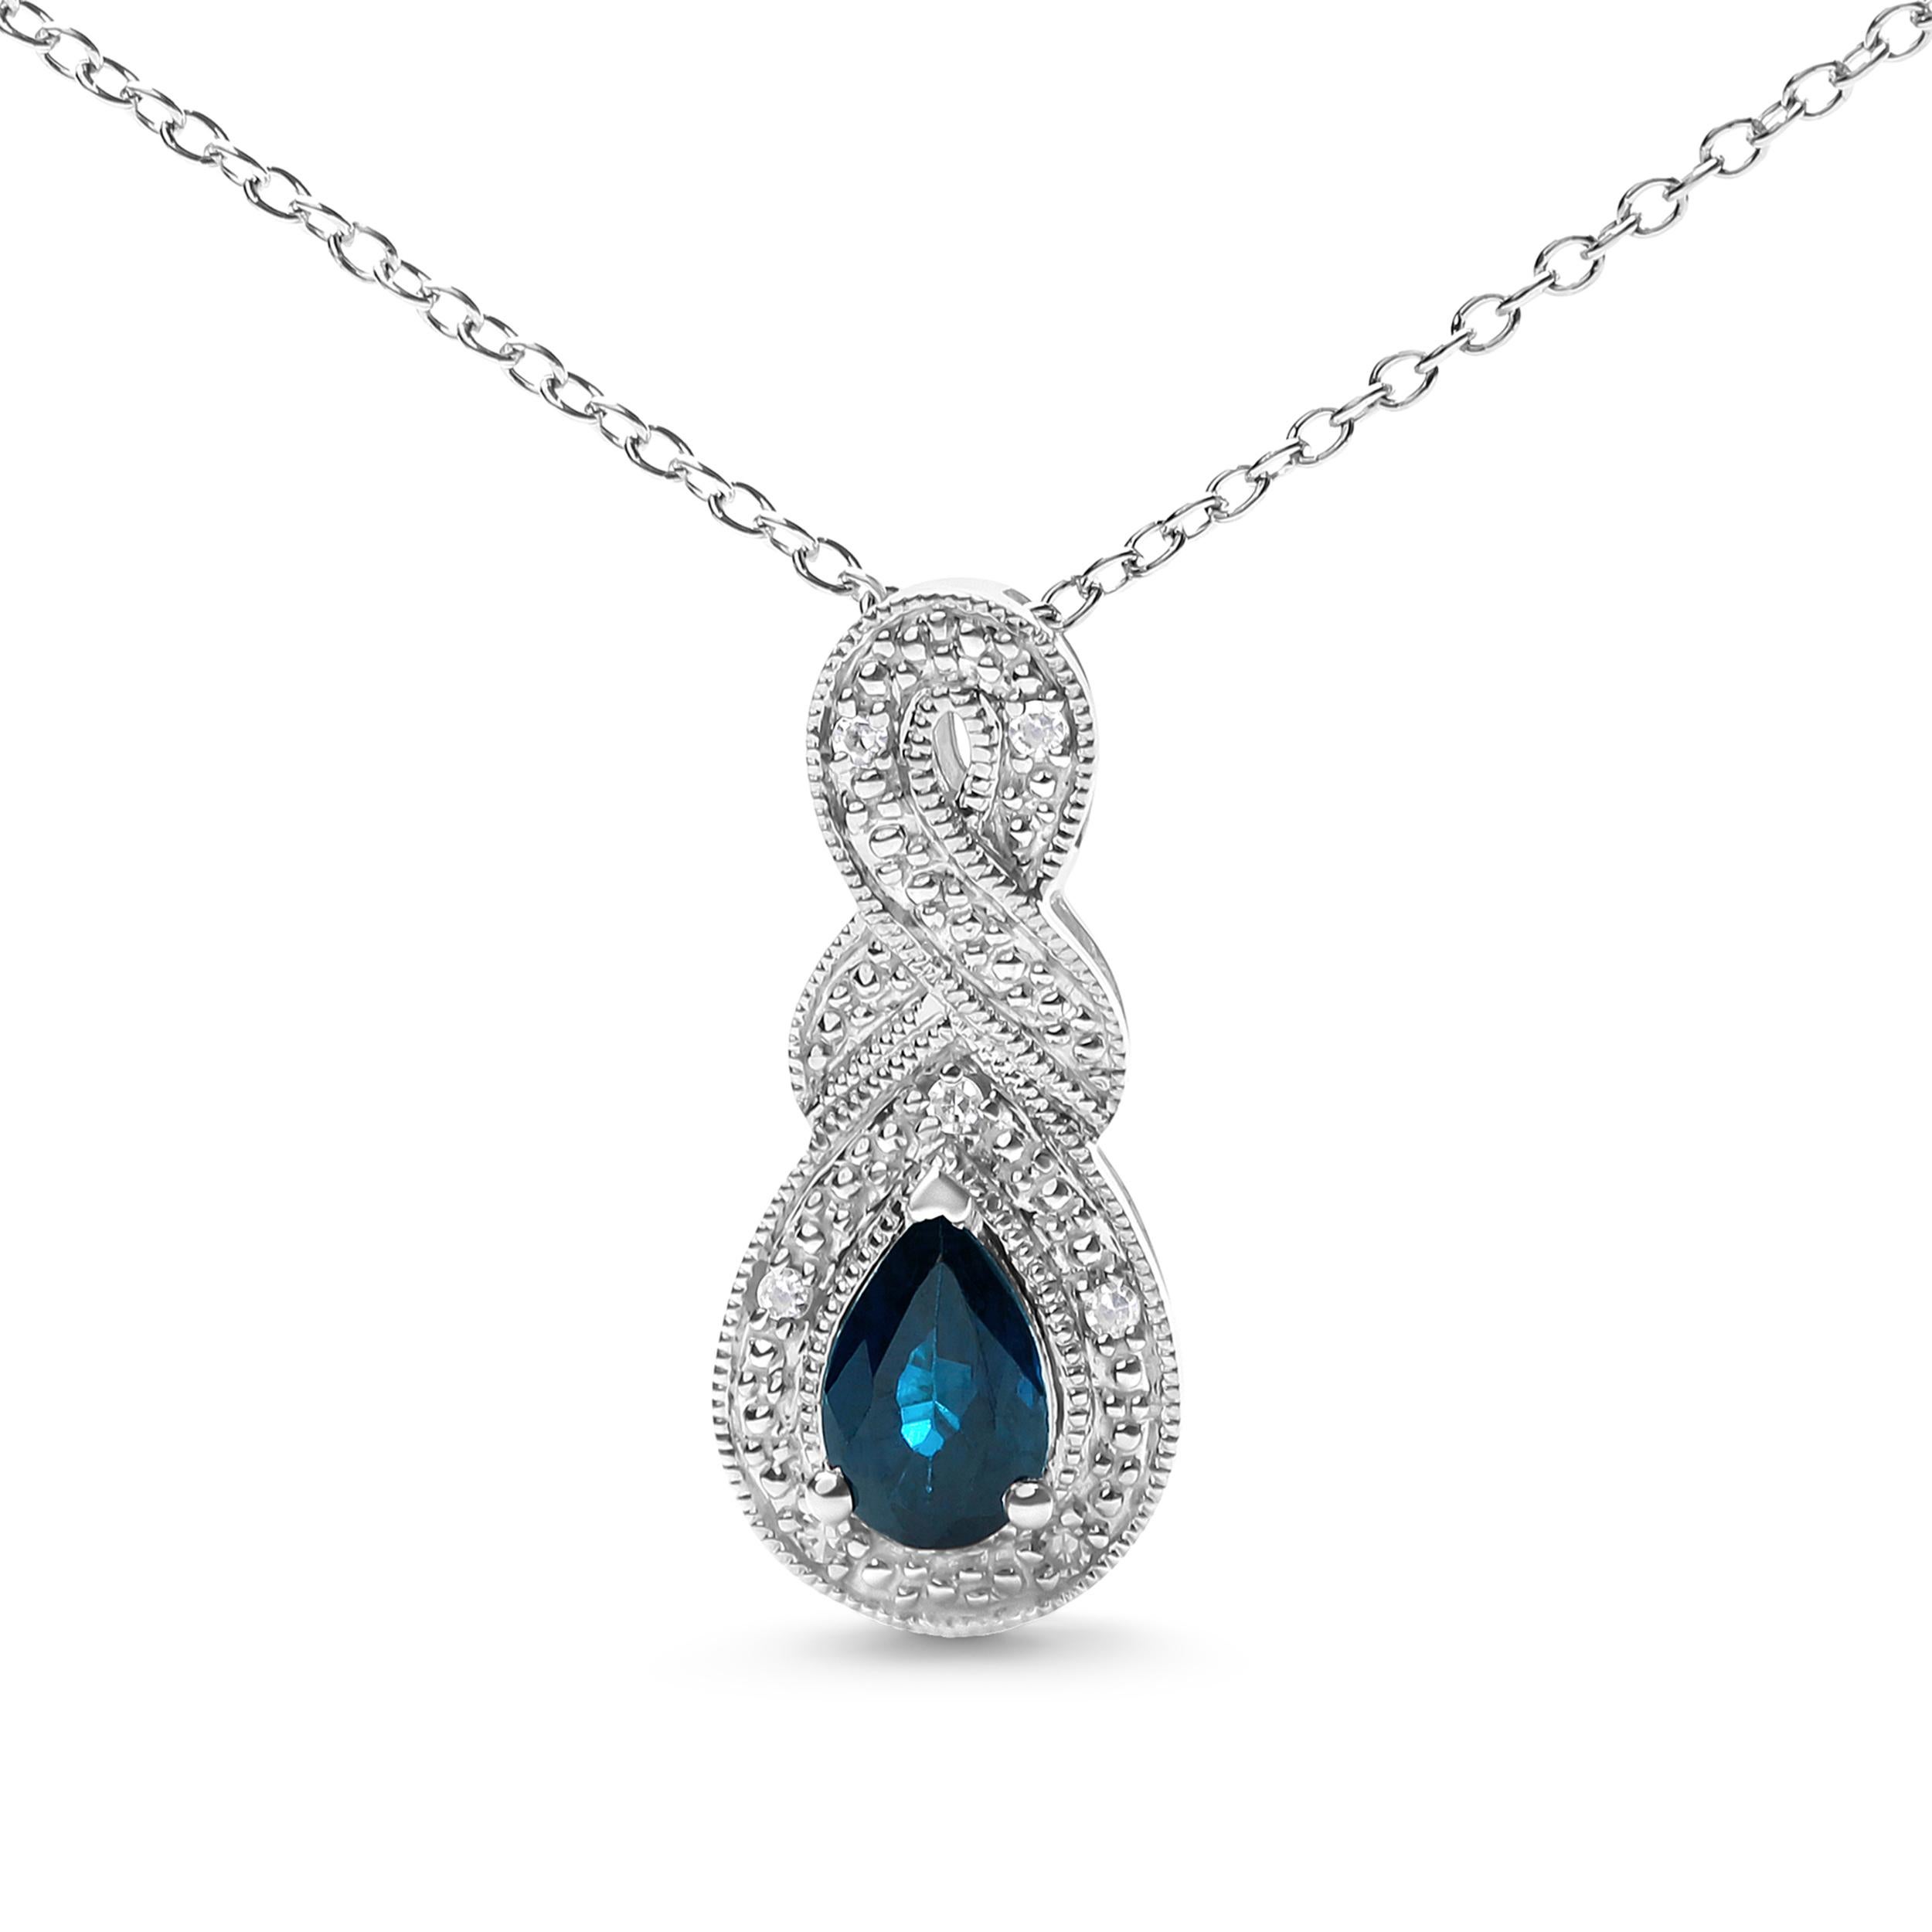 Elevate any outfit with this stunning .925 sterling silver sapphire and diamond accent drop pendant necklace. The pear-shaped blue sapphire, measuring 6 x 4mm, is a natural heat-treated gemstone that radiates a deep blue hue. The delicate 18